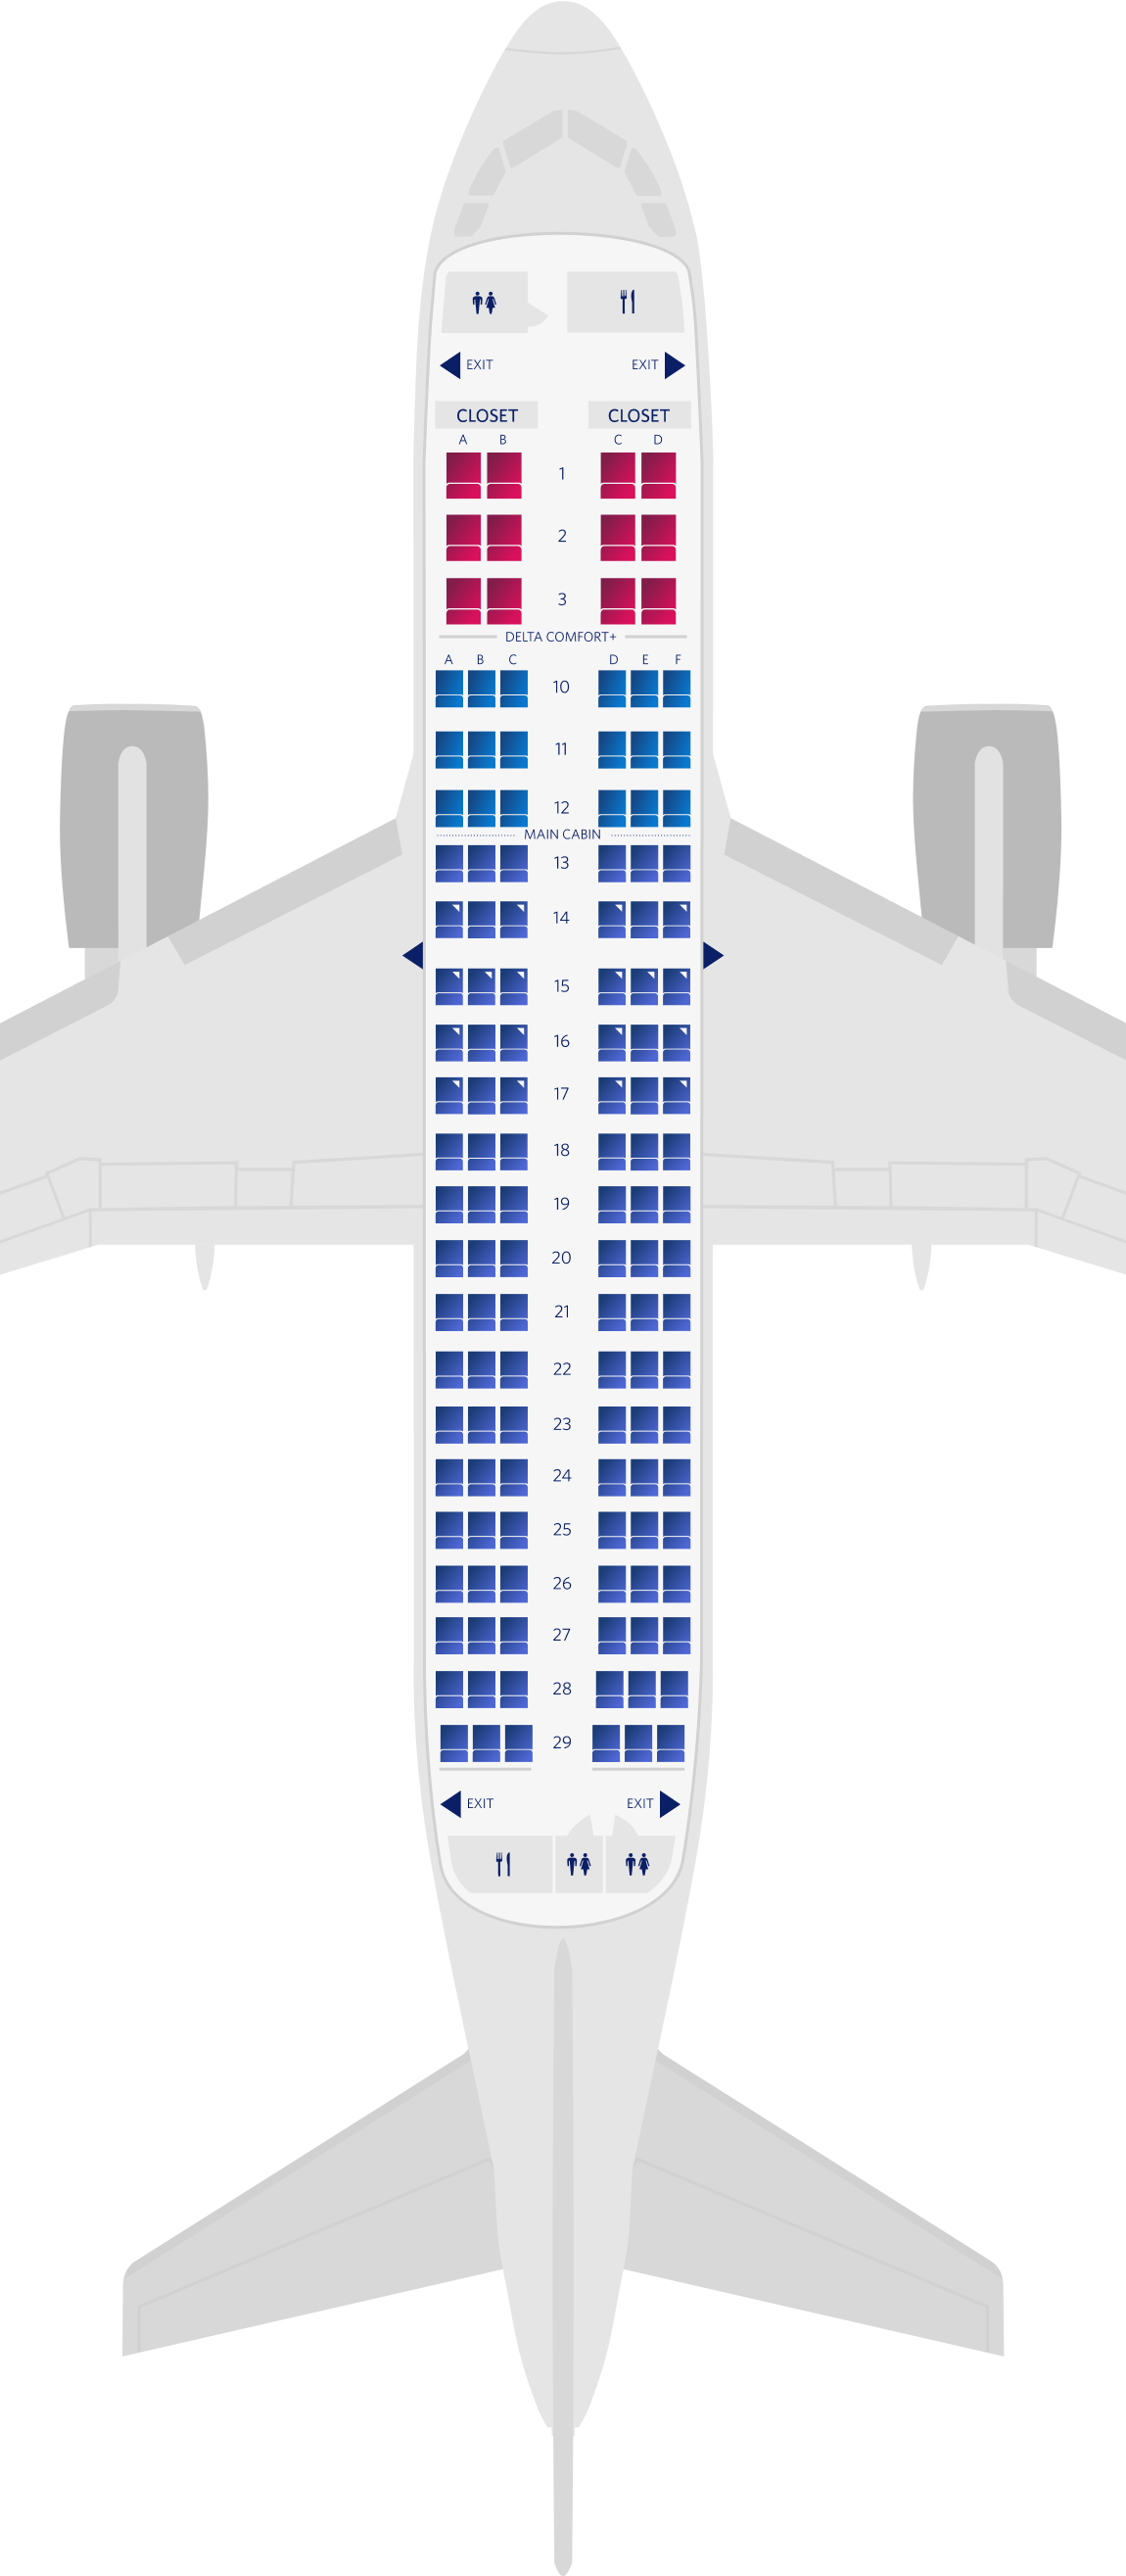 Airbus A319-100 3-Cabin Seat Map